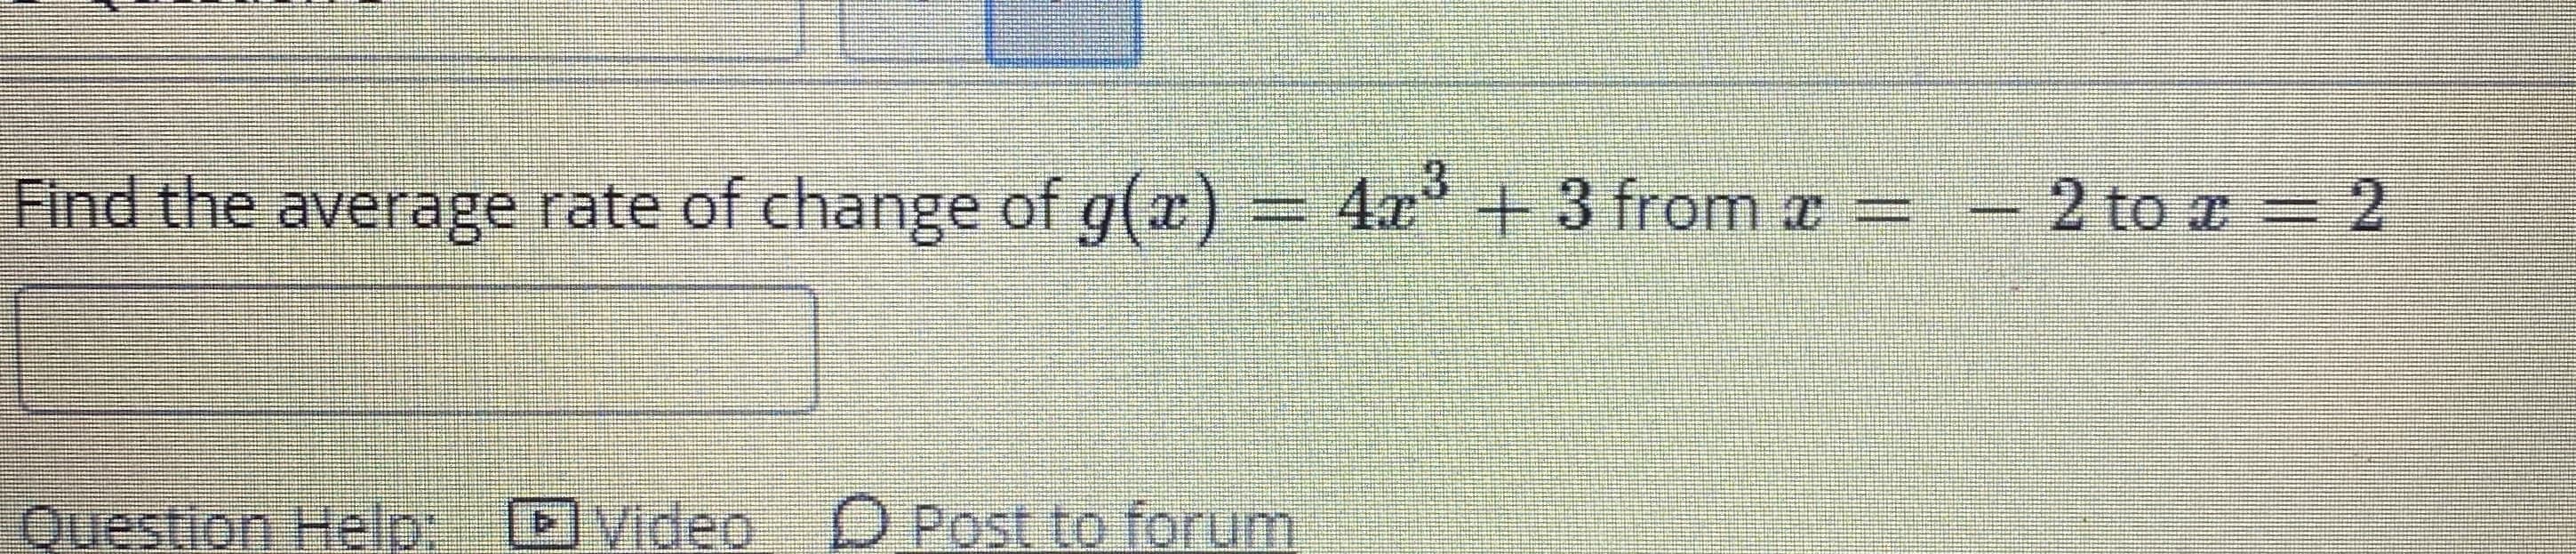 Find the average rate of change of g(a) = 4x° + 3 from a =
2 to x = 2
